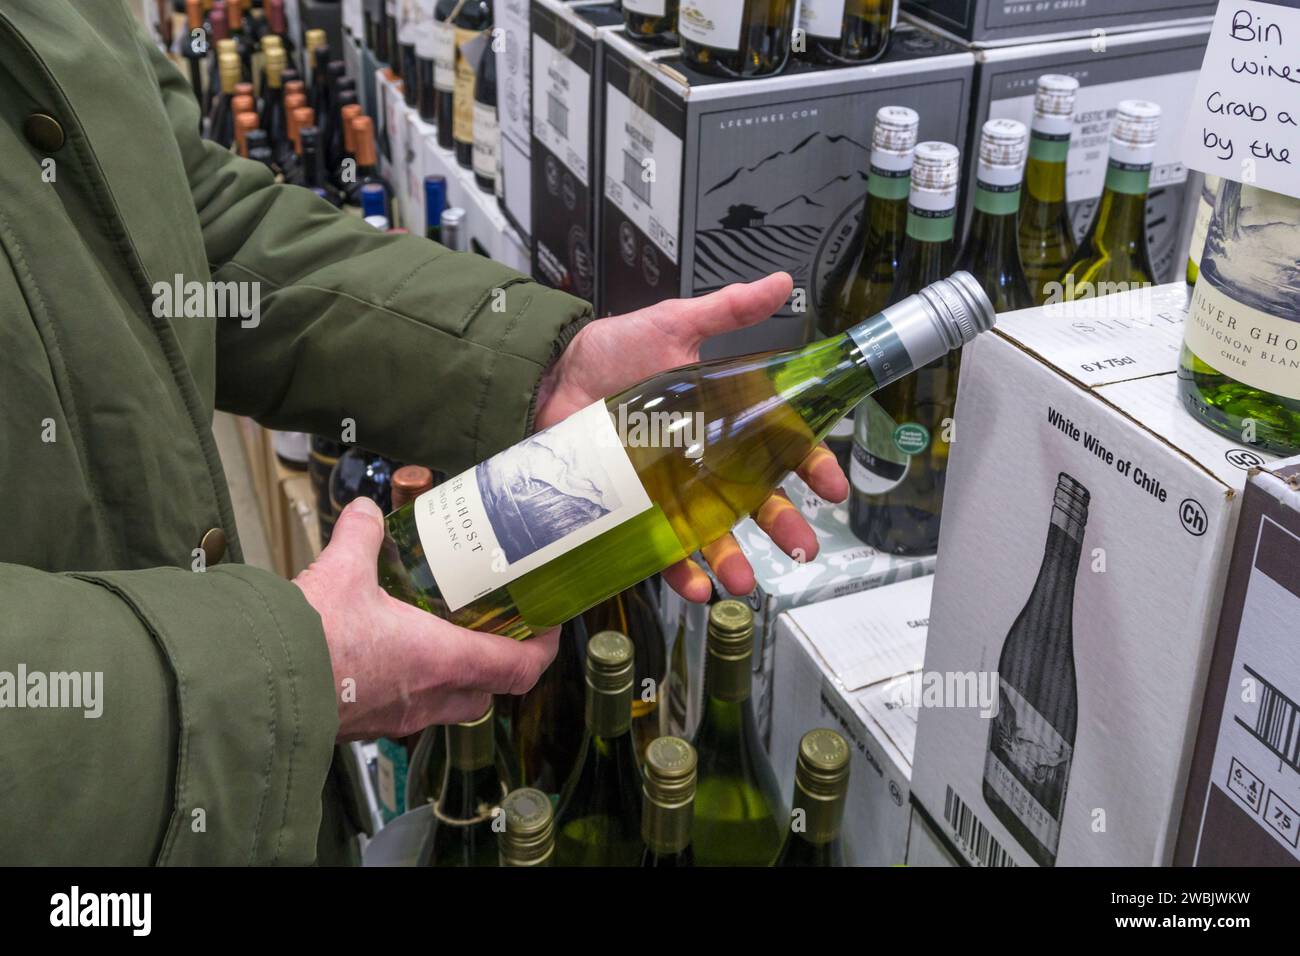 Woman reading the label of a bottle of Silver Ghost Chilean Sauvignon Blanc wine in a Majestic Wine off-licence. Stock Photo